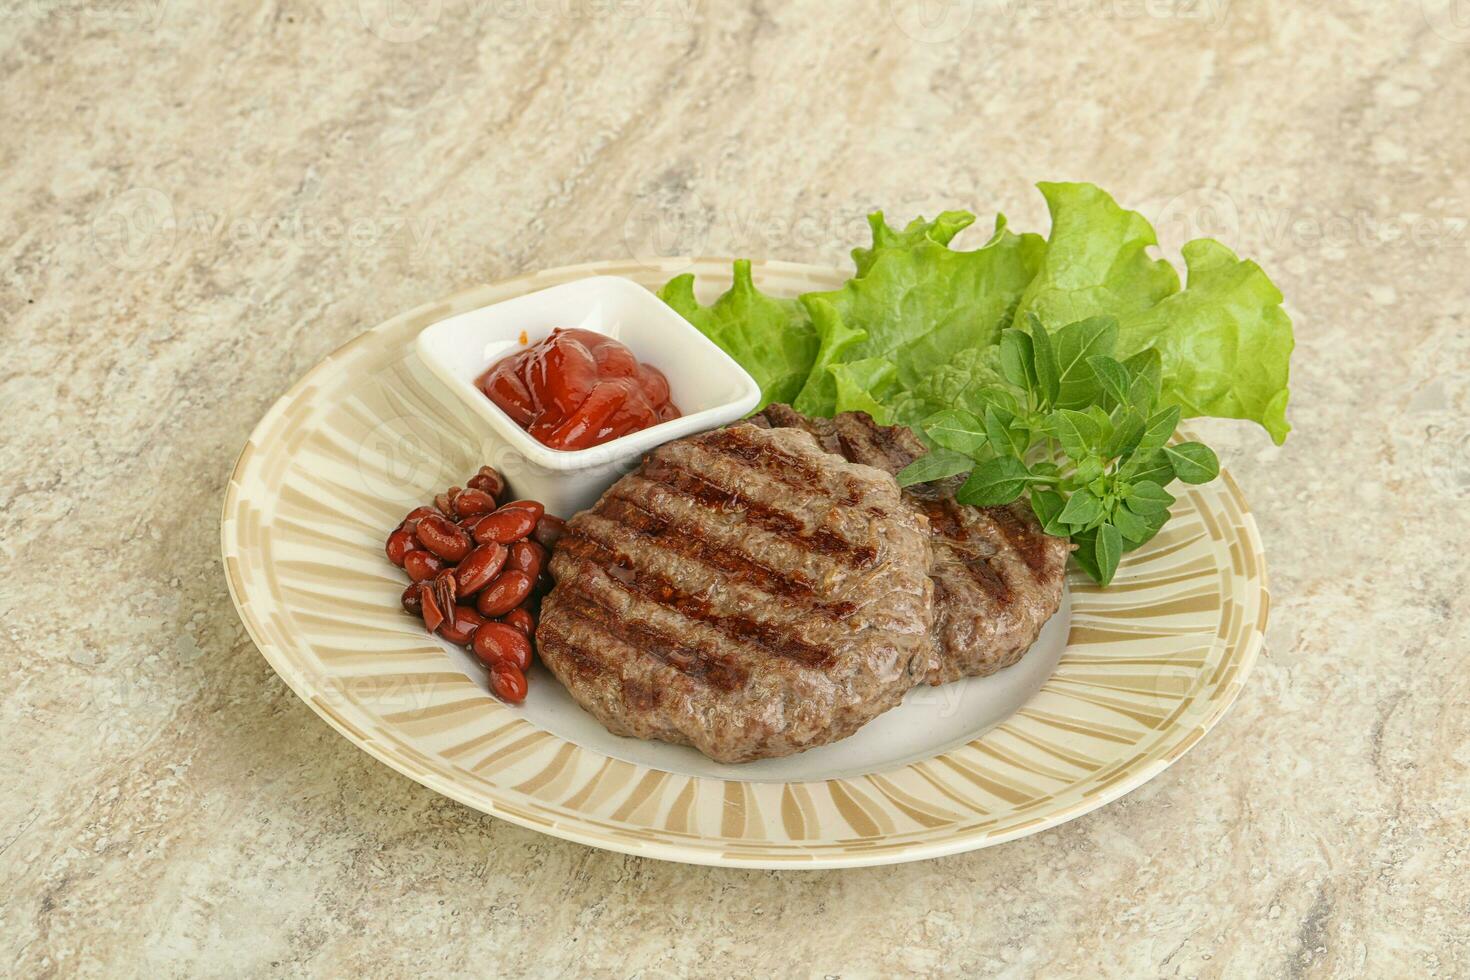 Grilled beef burger cutlet with sauce photo